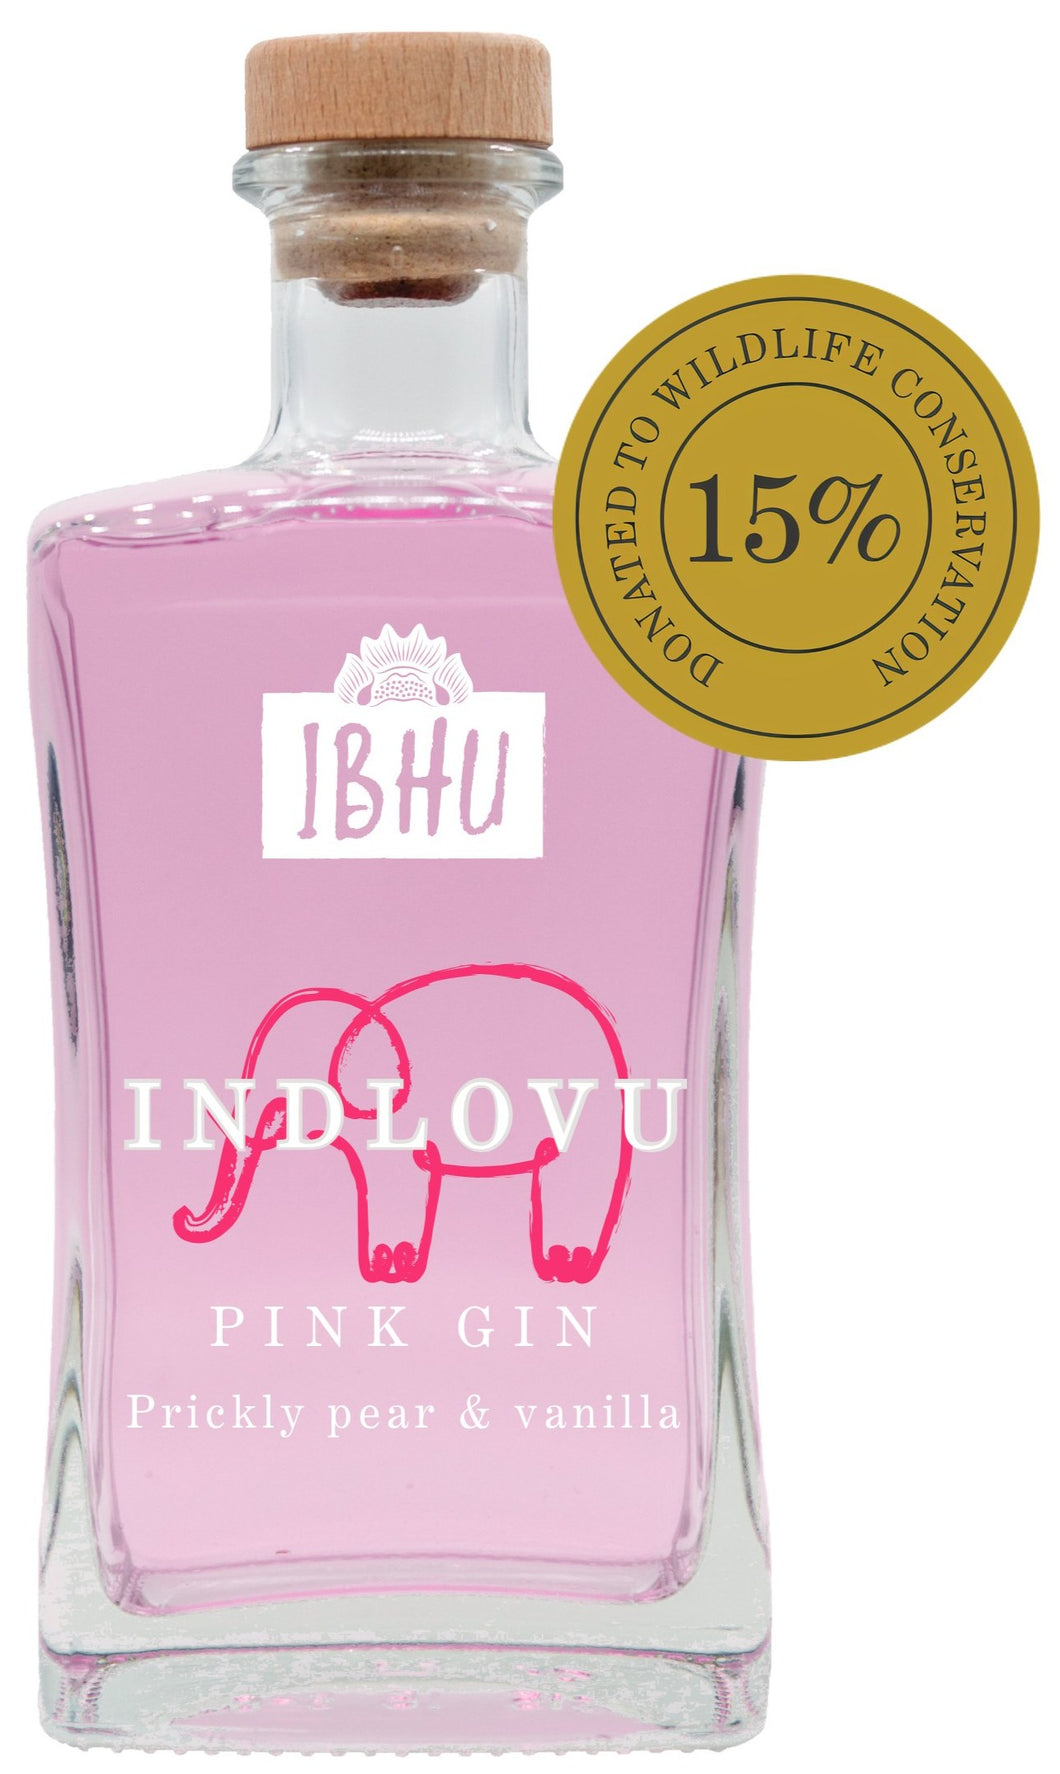 INDLOVU Pink Prickly Pear and Vanilla Gin 750ml - Together Store South Africa